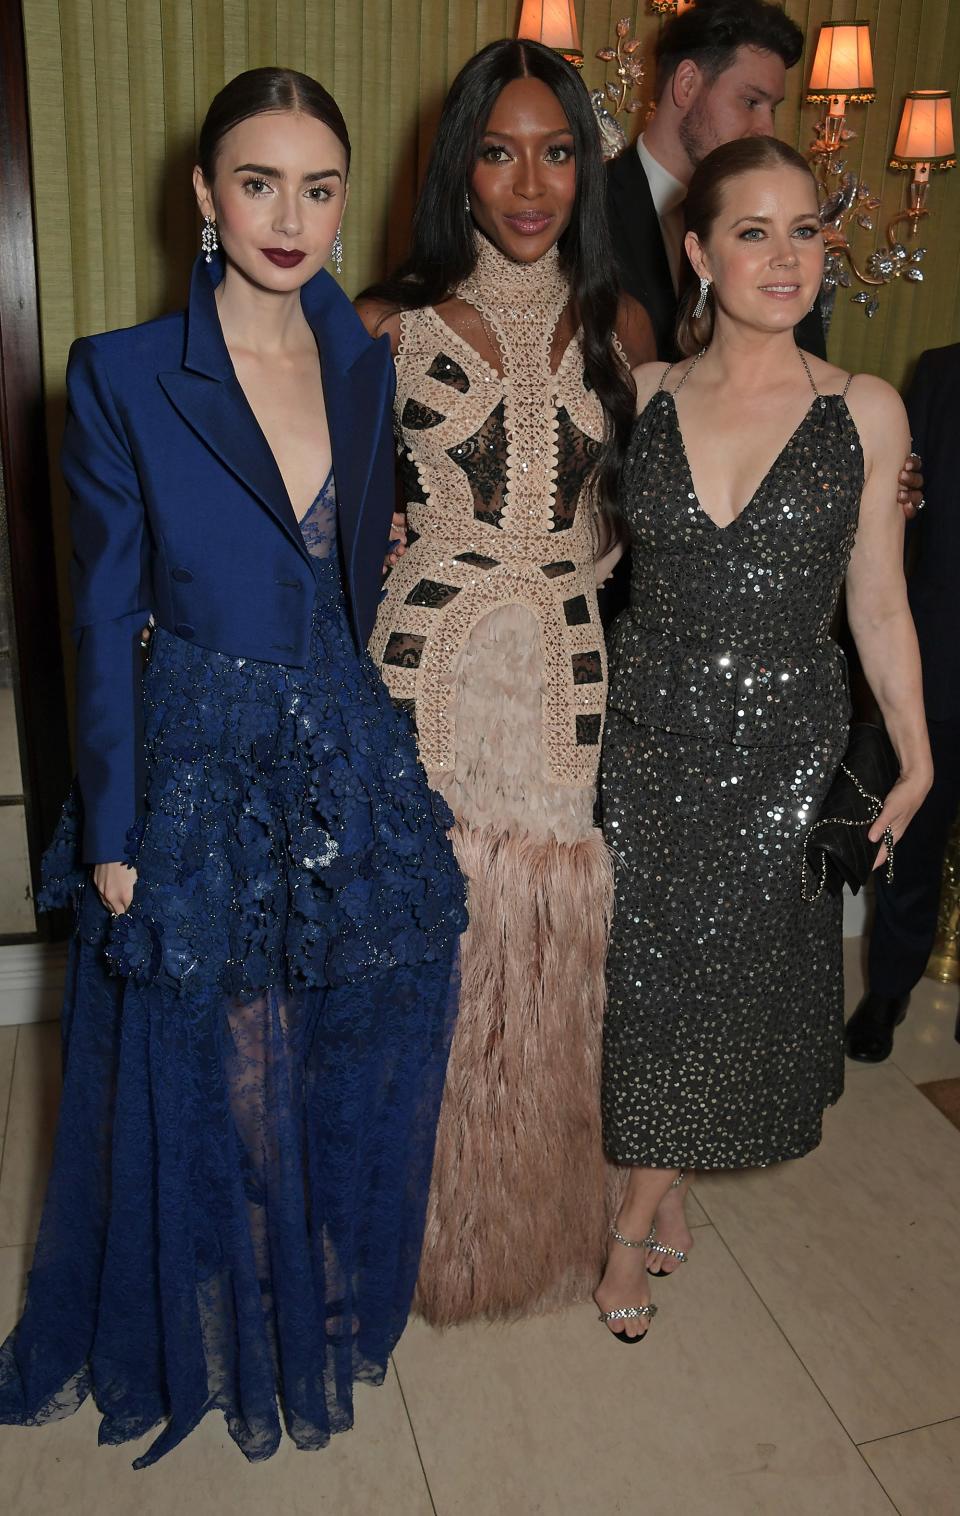 Lily Collins, Naomi Campbell and Amy Adams attend the British Vogue and Tiffany & Co. Celebrate Fashion and Film Party at Annabel’s